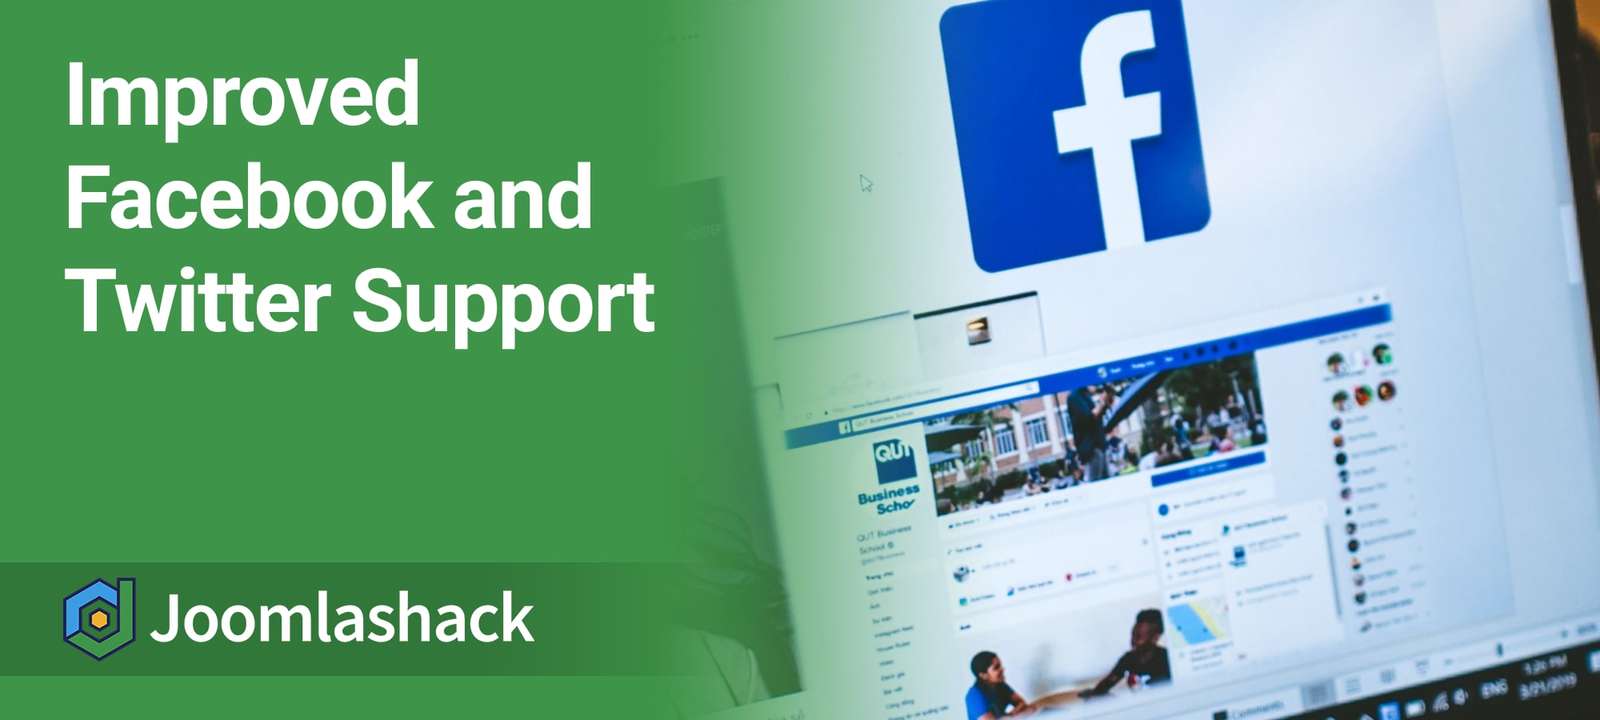 Shack Open Graph Has Improved Facebook and Twitter Support